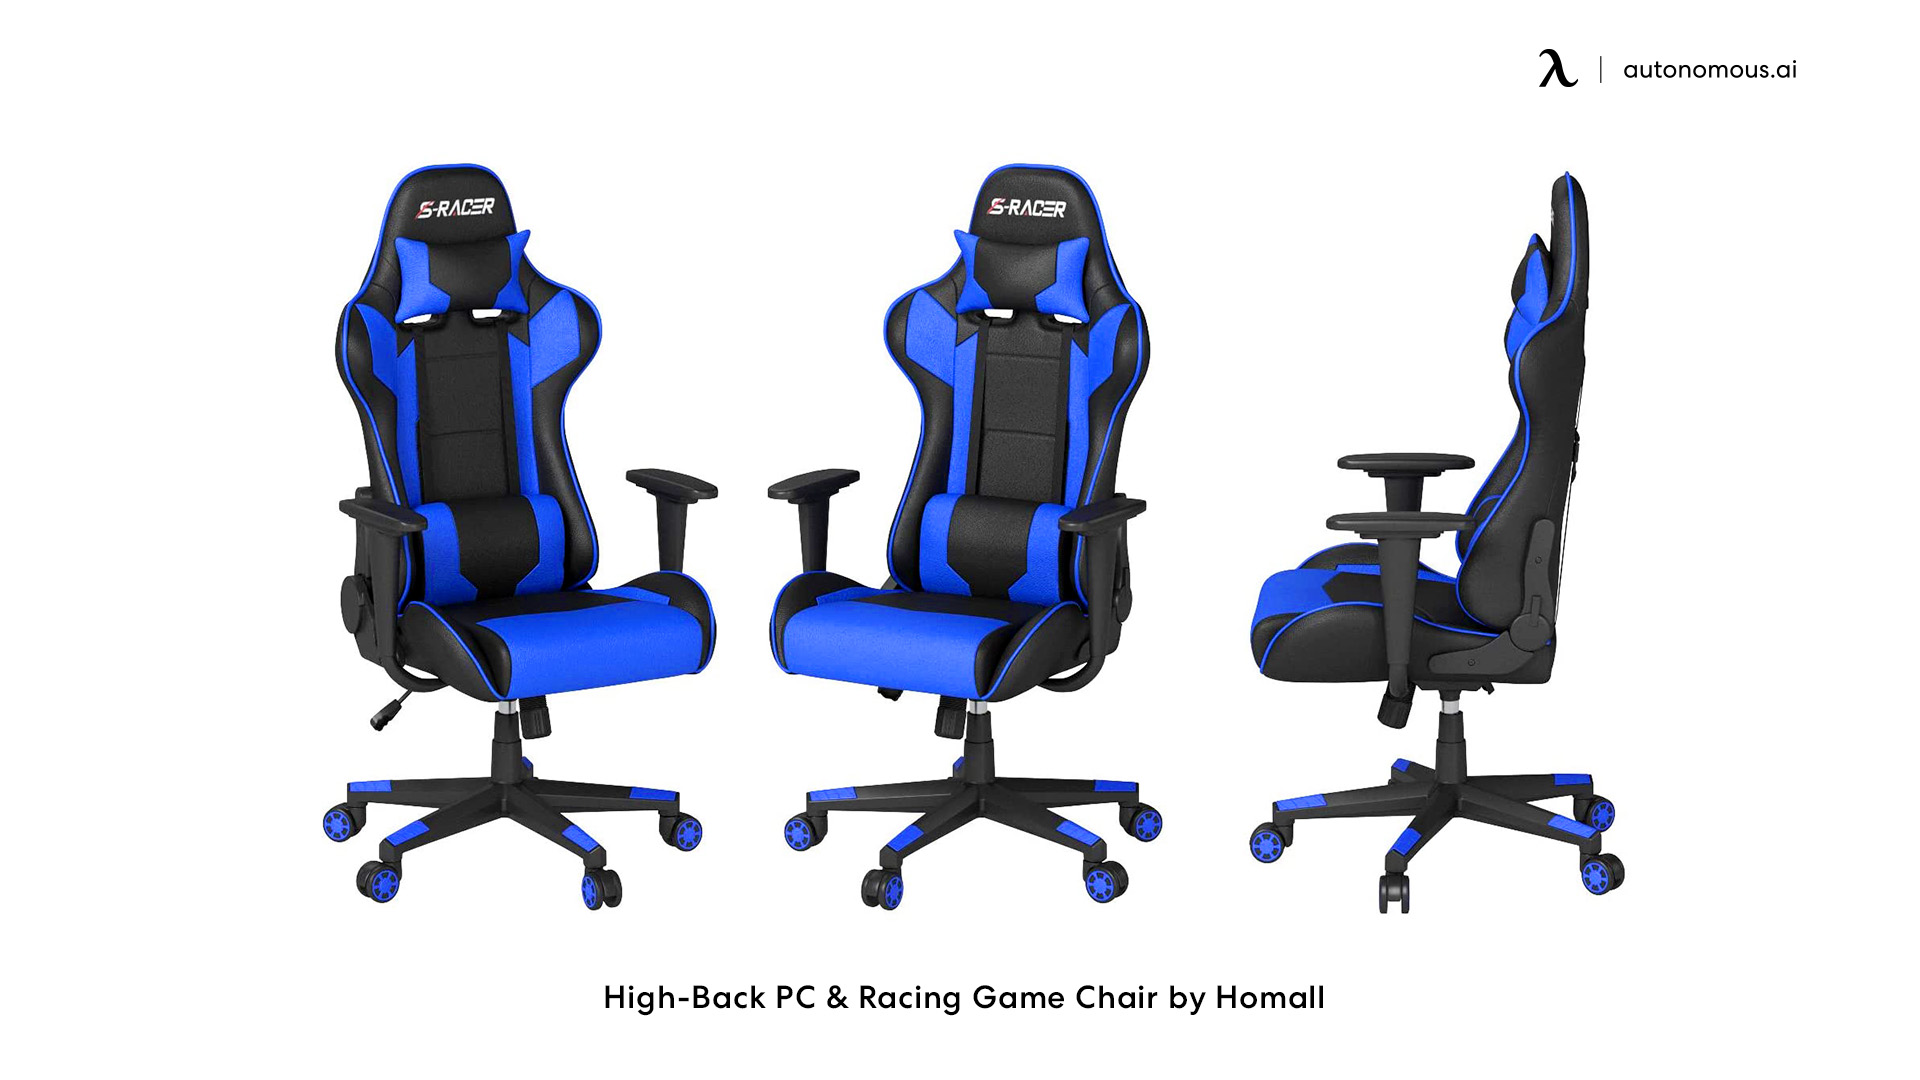 High-Back PC & Racing Game Chair by Homall